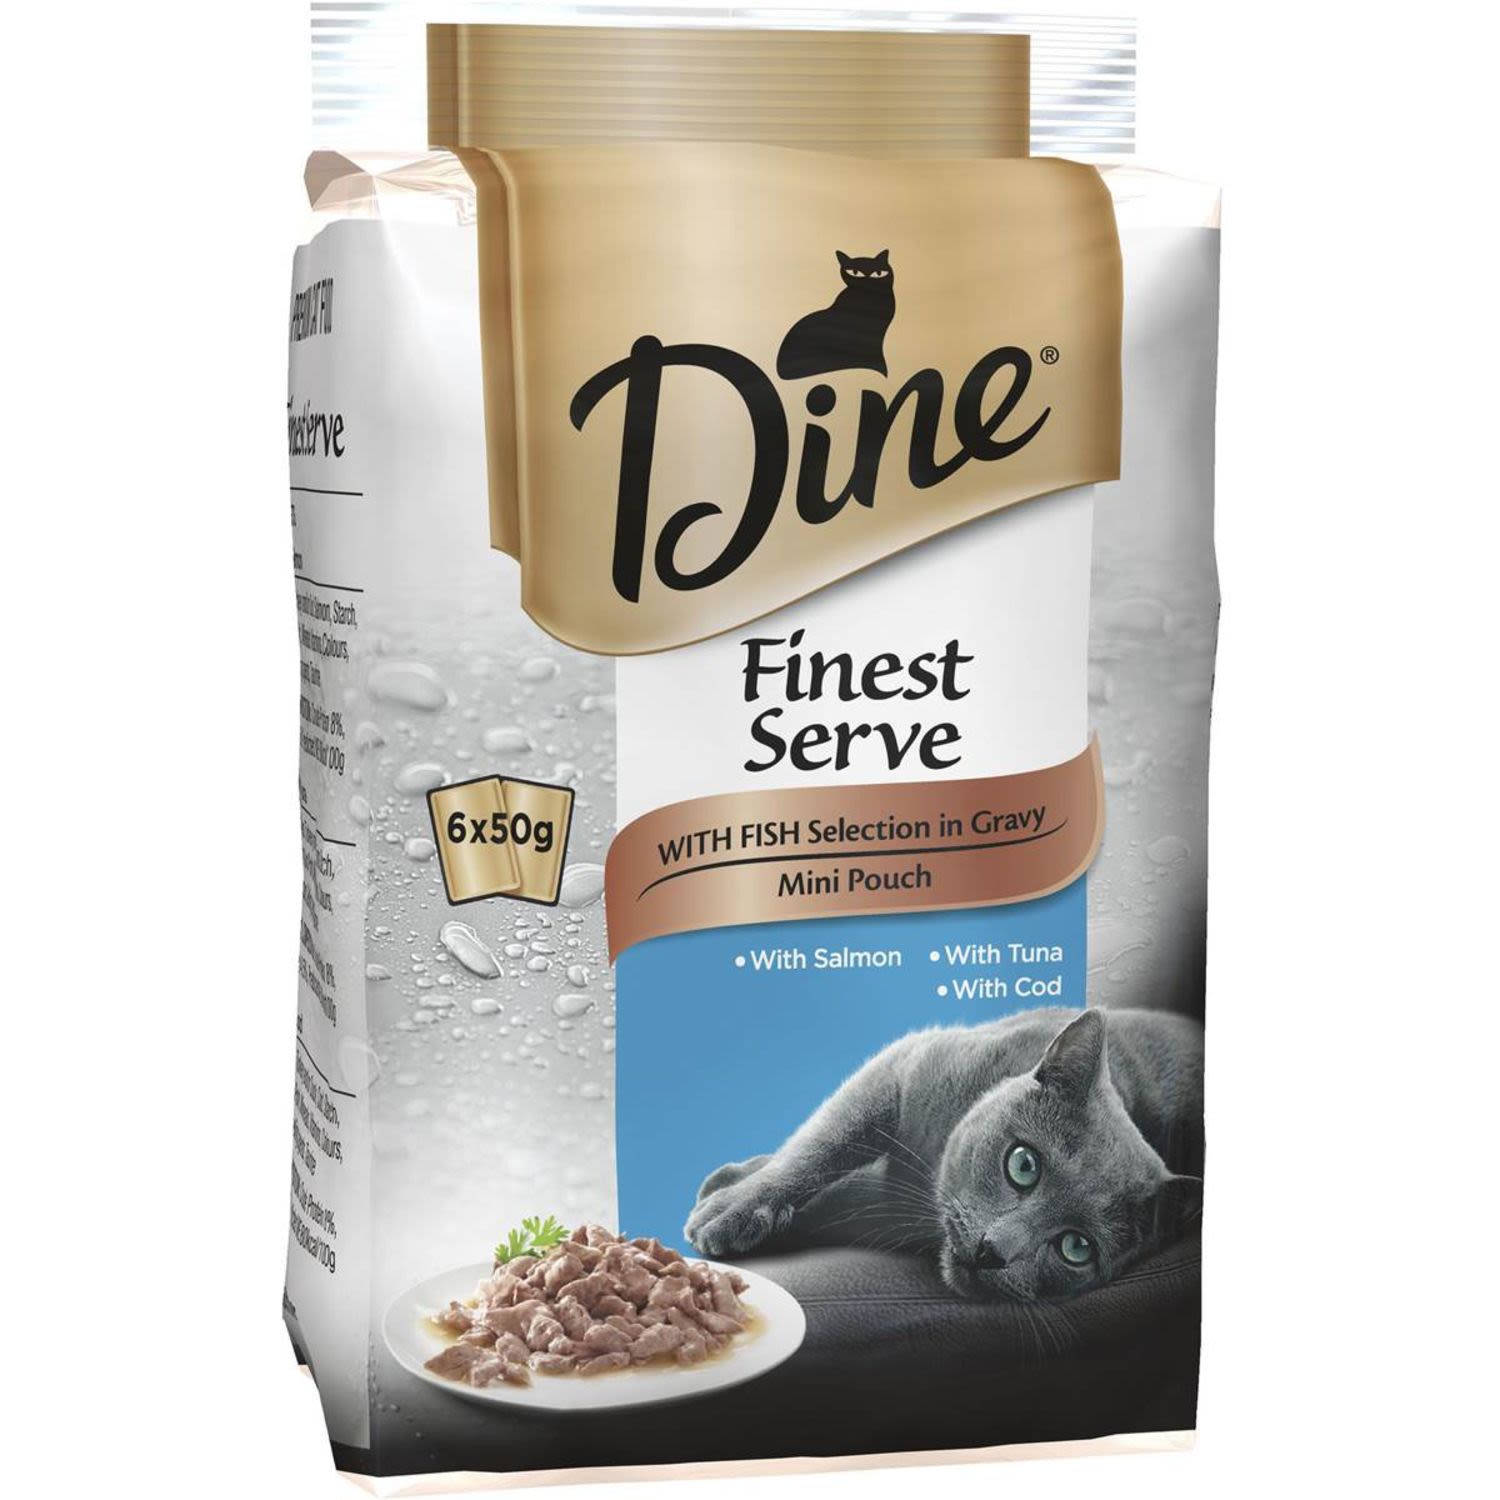 Dine Finest Serve With Fish Selection In Gravy Mini Pouch, 6 Each